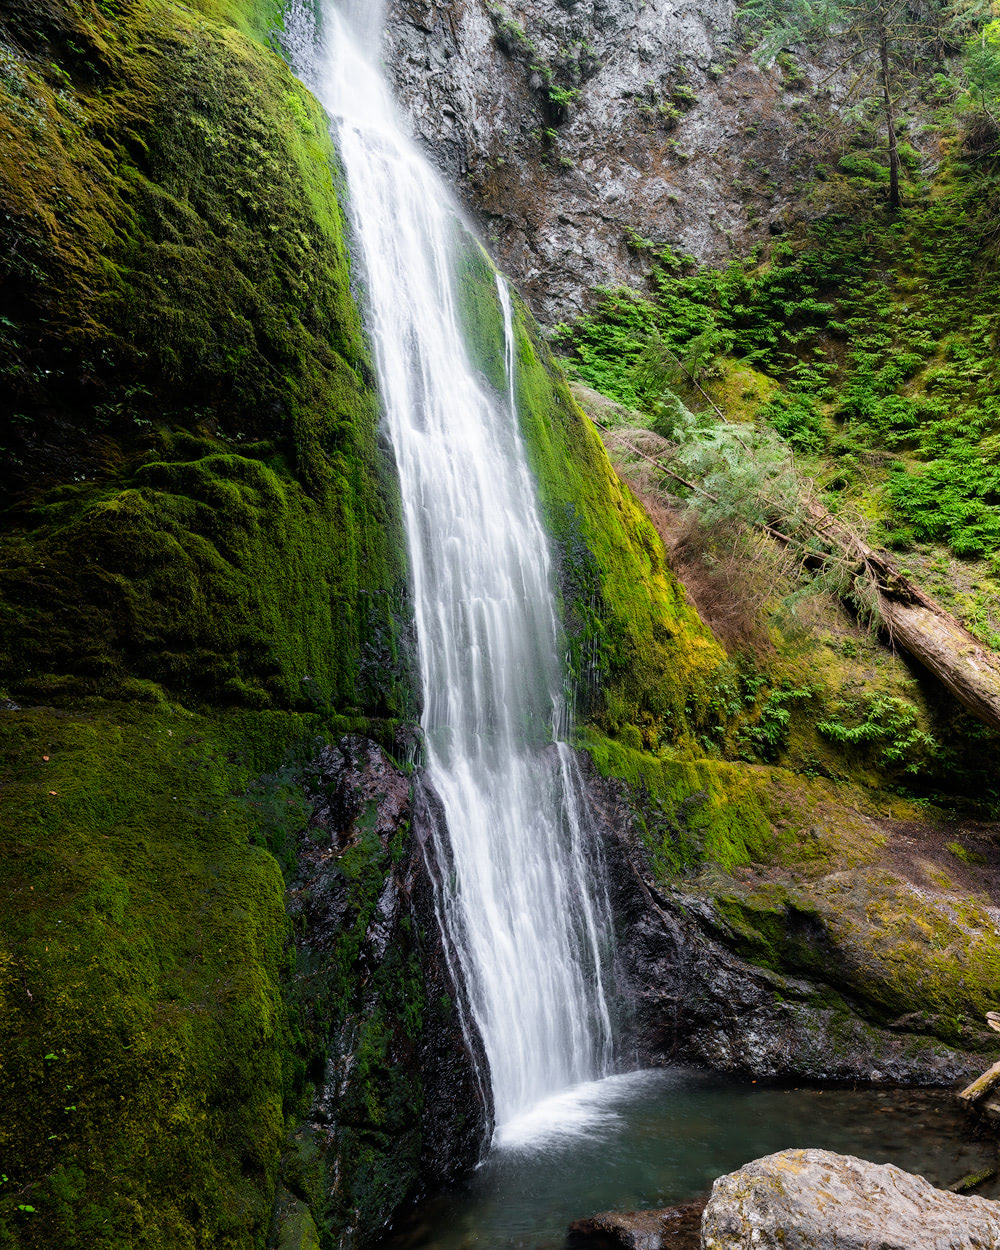 Beginner Friendly Hikes in Washington State - Marymere Falls Trail